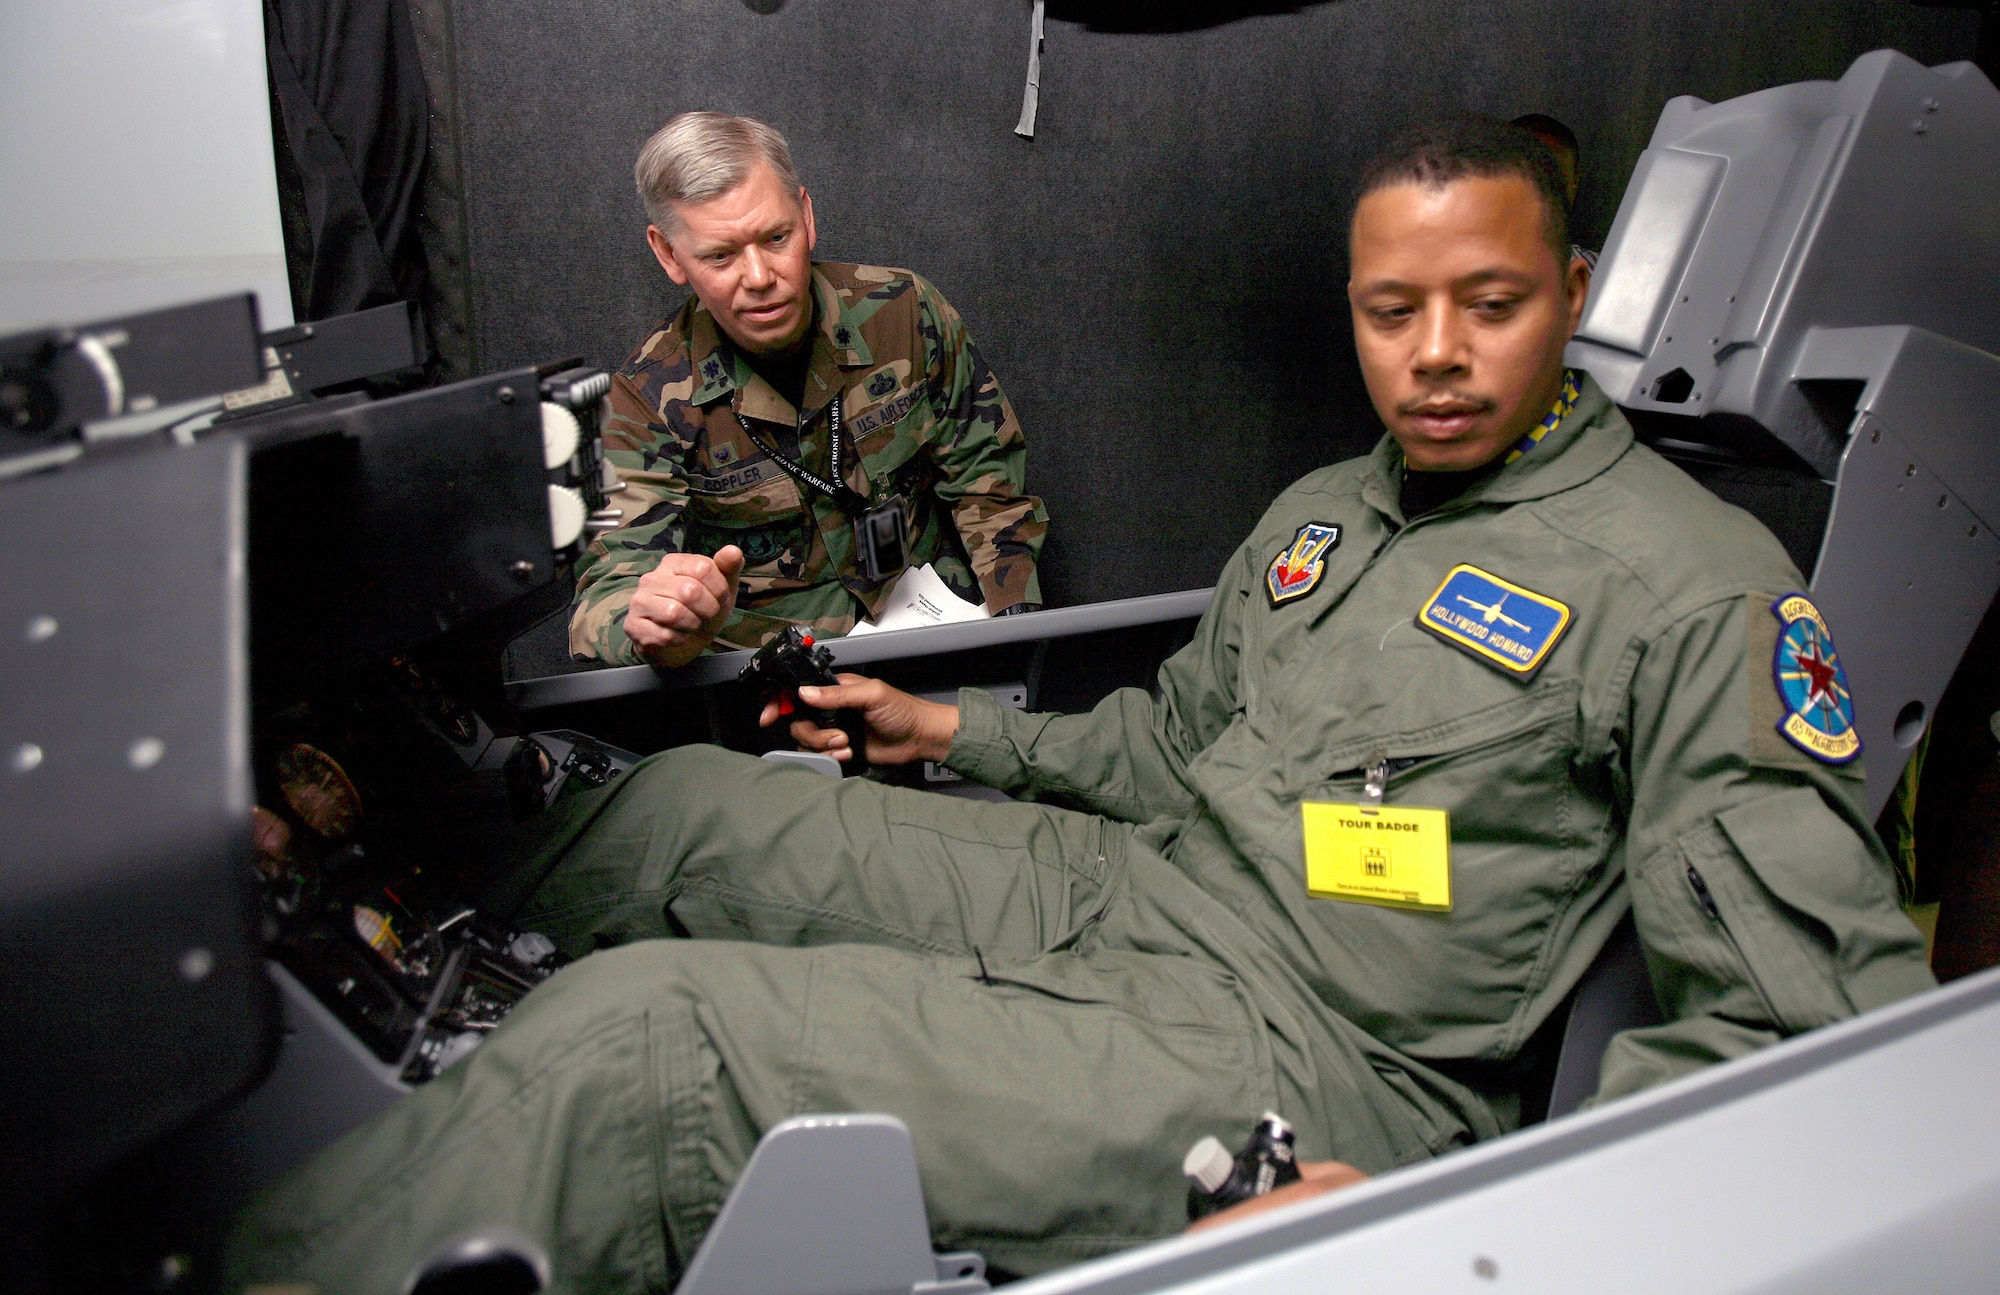 Lt. Col. David Coppler instructs actor Terrence Howard on the controls of an F-16 Fighting Falcon simulator at Edwards Air Force Base, Calif., to help prepare Howard for his role in the movie, "Iron Man." Movie director Jon Favreau and his crew spent three days filming at Edwards AFB. Colonel Coppler is the 772nd Test Squadron commander. (U.S. Air Force photo/Jet Fabara)